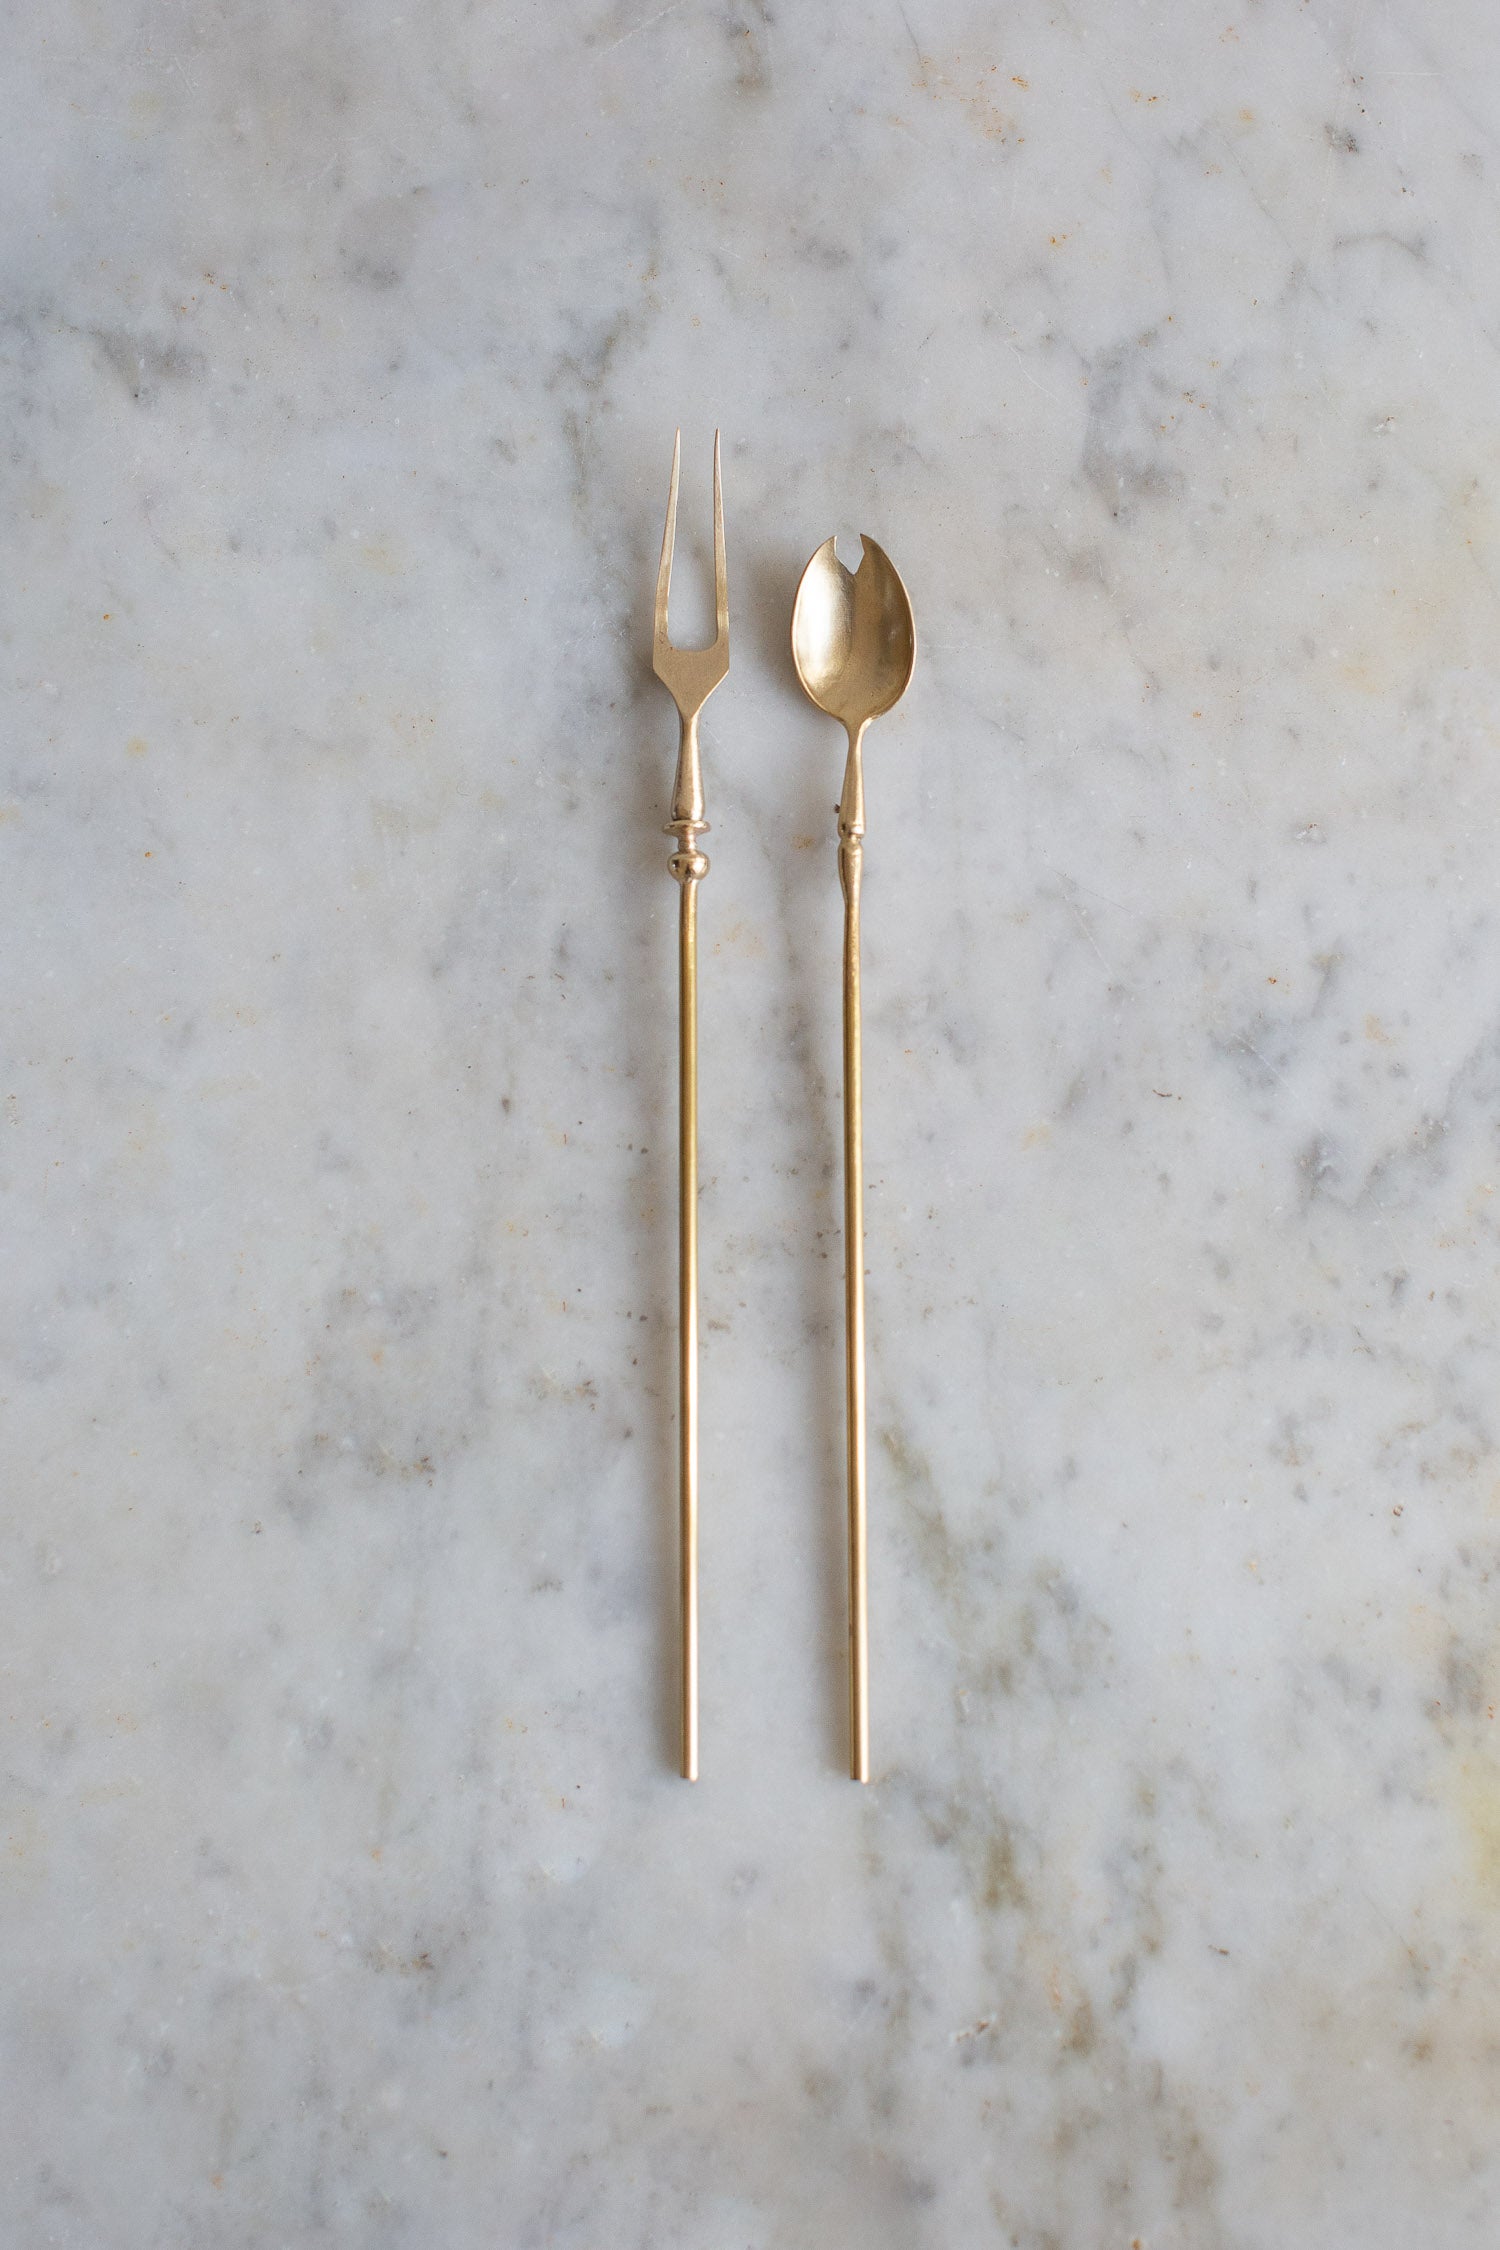 handmade brass fork and spoon